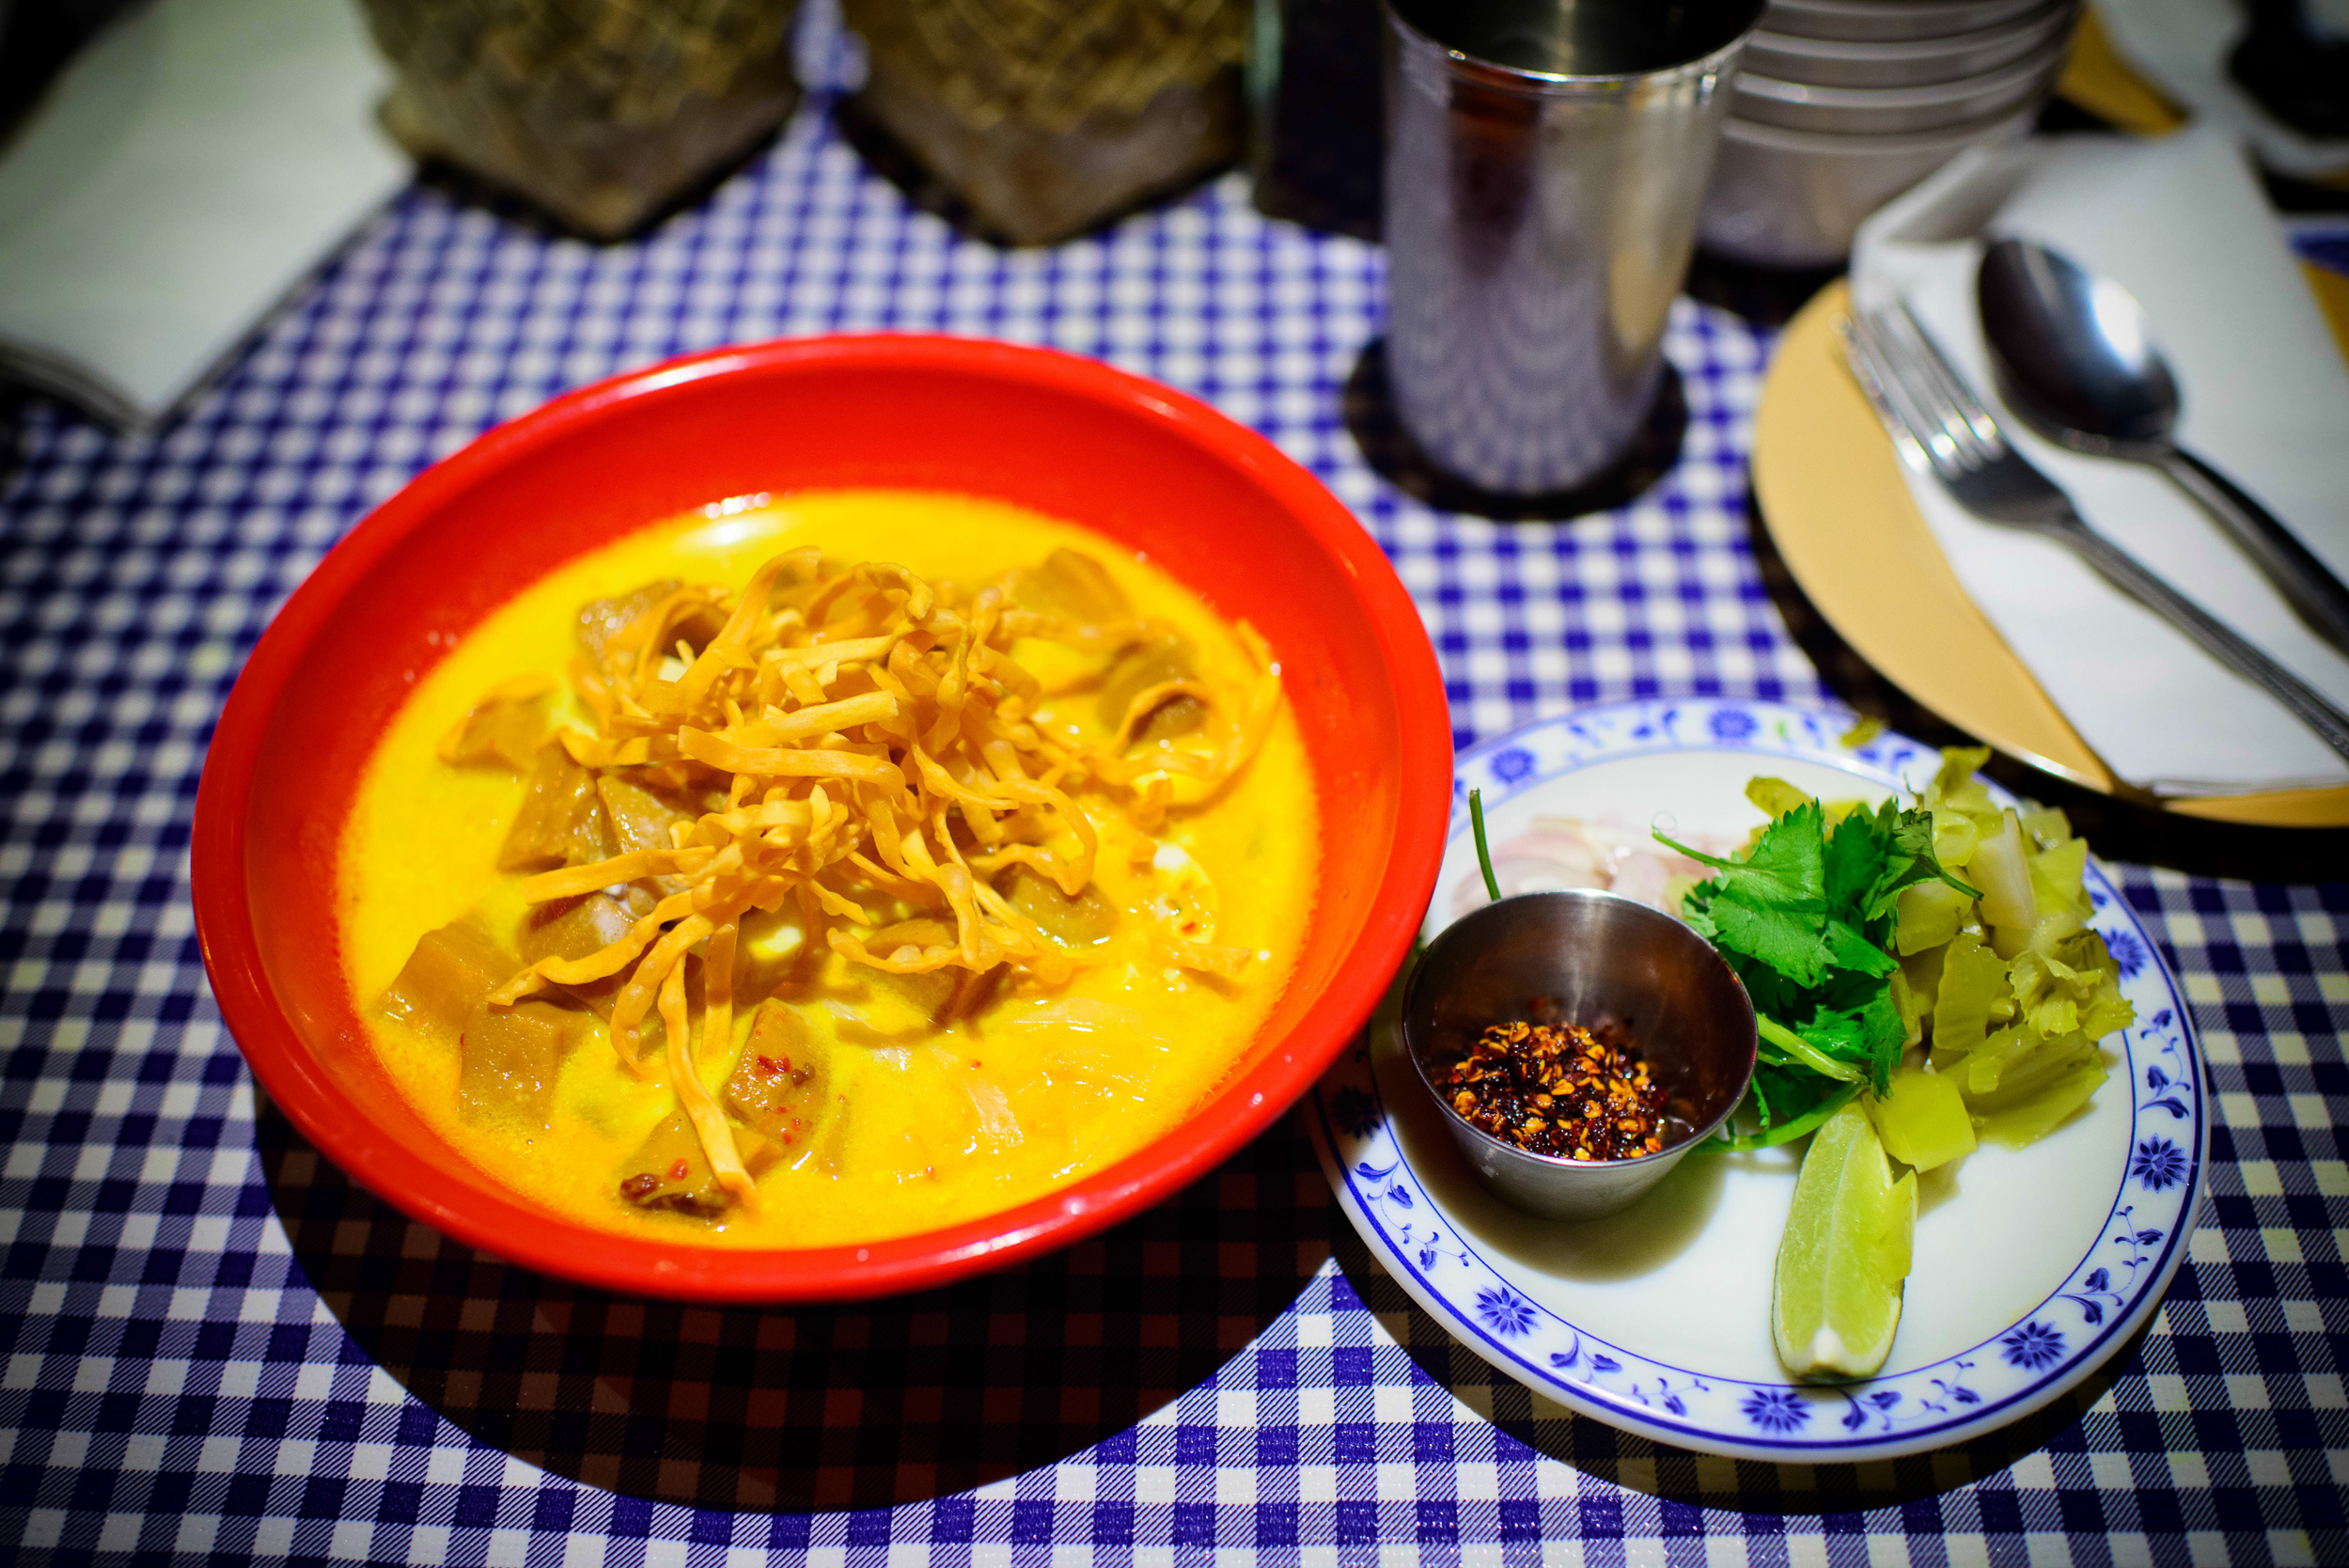 Khao Soi - Northern Thai mild curry noodle soup made with "secre